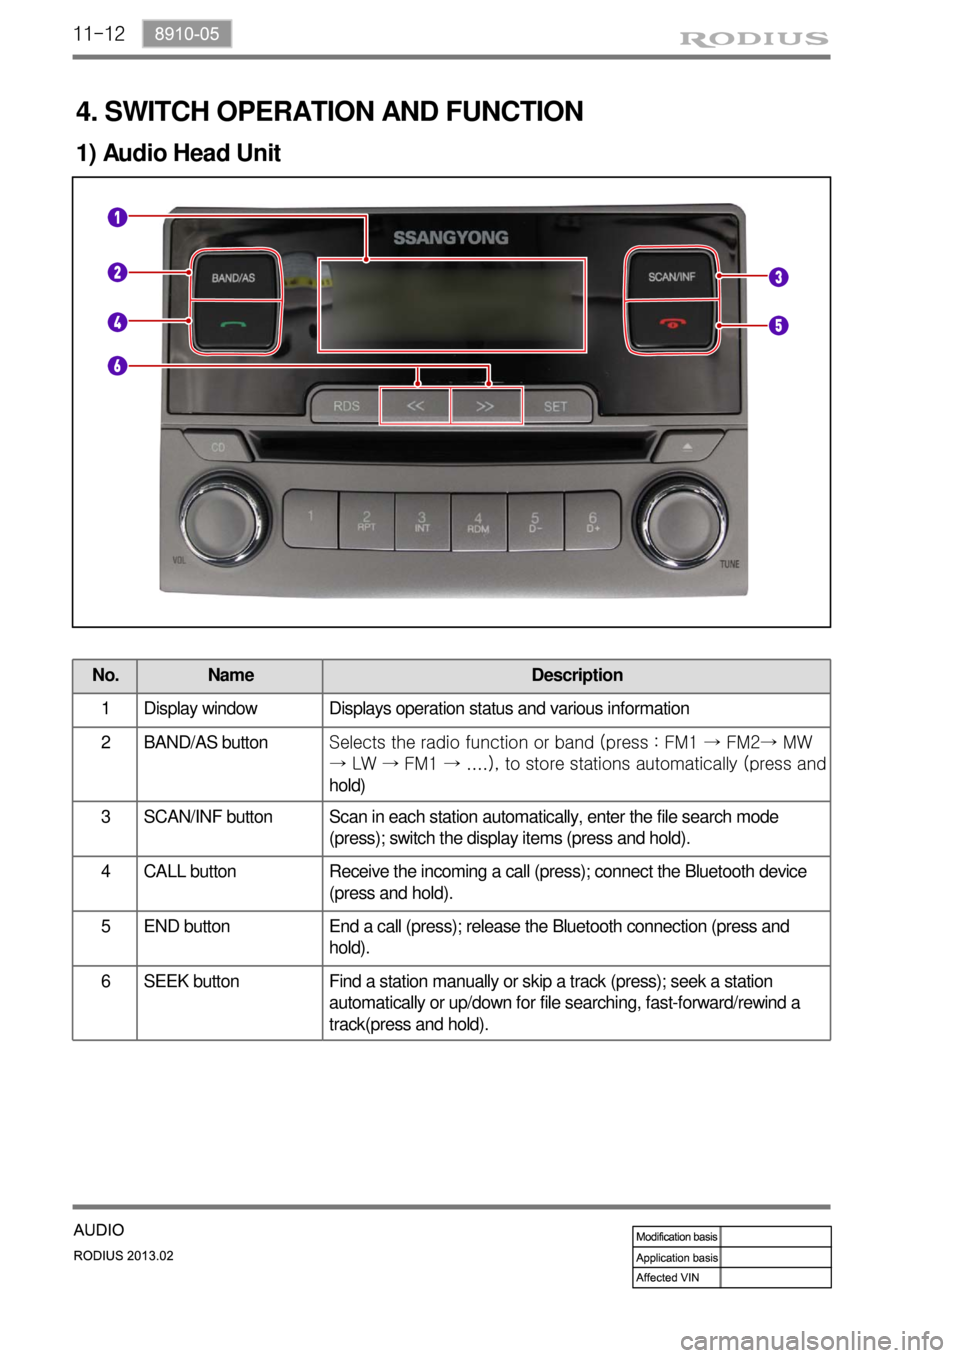 SSANGYONG TURISMO 2013  Service Manual 11-12
1) Audio Head Unit
4. SWITCH OPERATION AND FUNCTION
No. Name Description
1 Display window Displays operation status and various information
2 BAND/AS buttonSelects the radio function or band (pr